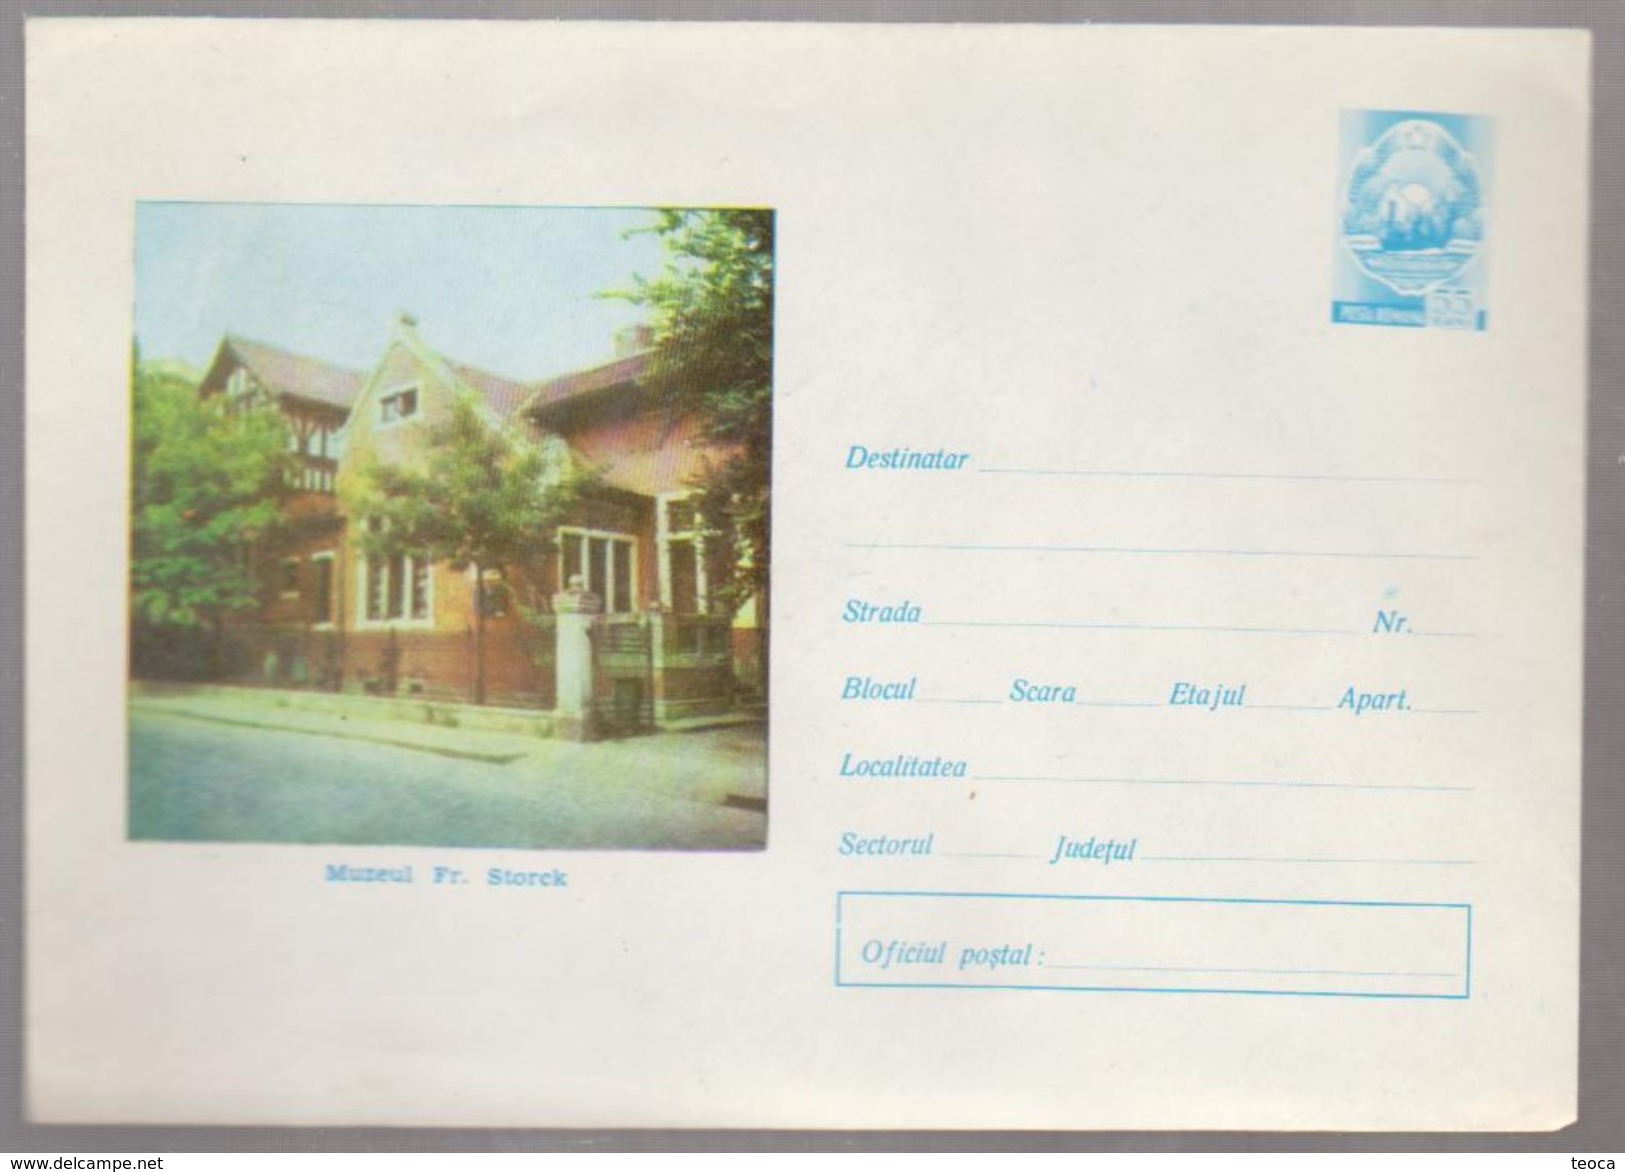 COVER Envelope ROUMANIE 1968, MUSEUM FR.STORCK - Covers & Documents